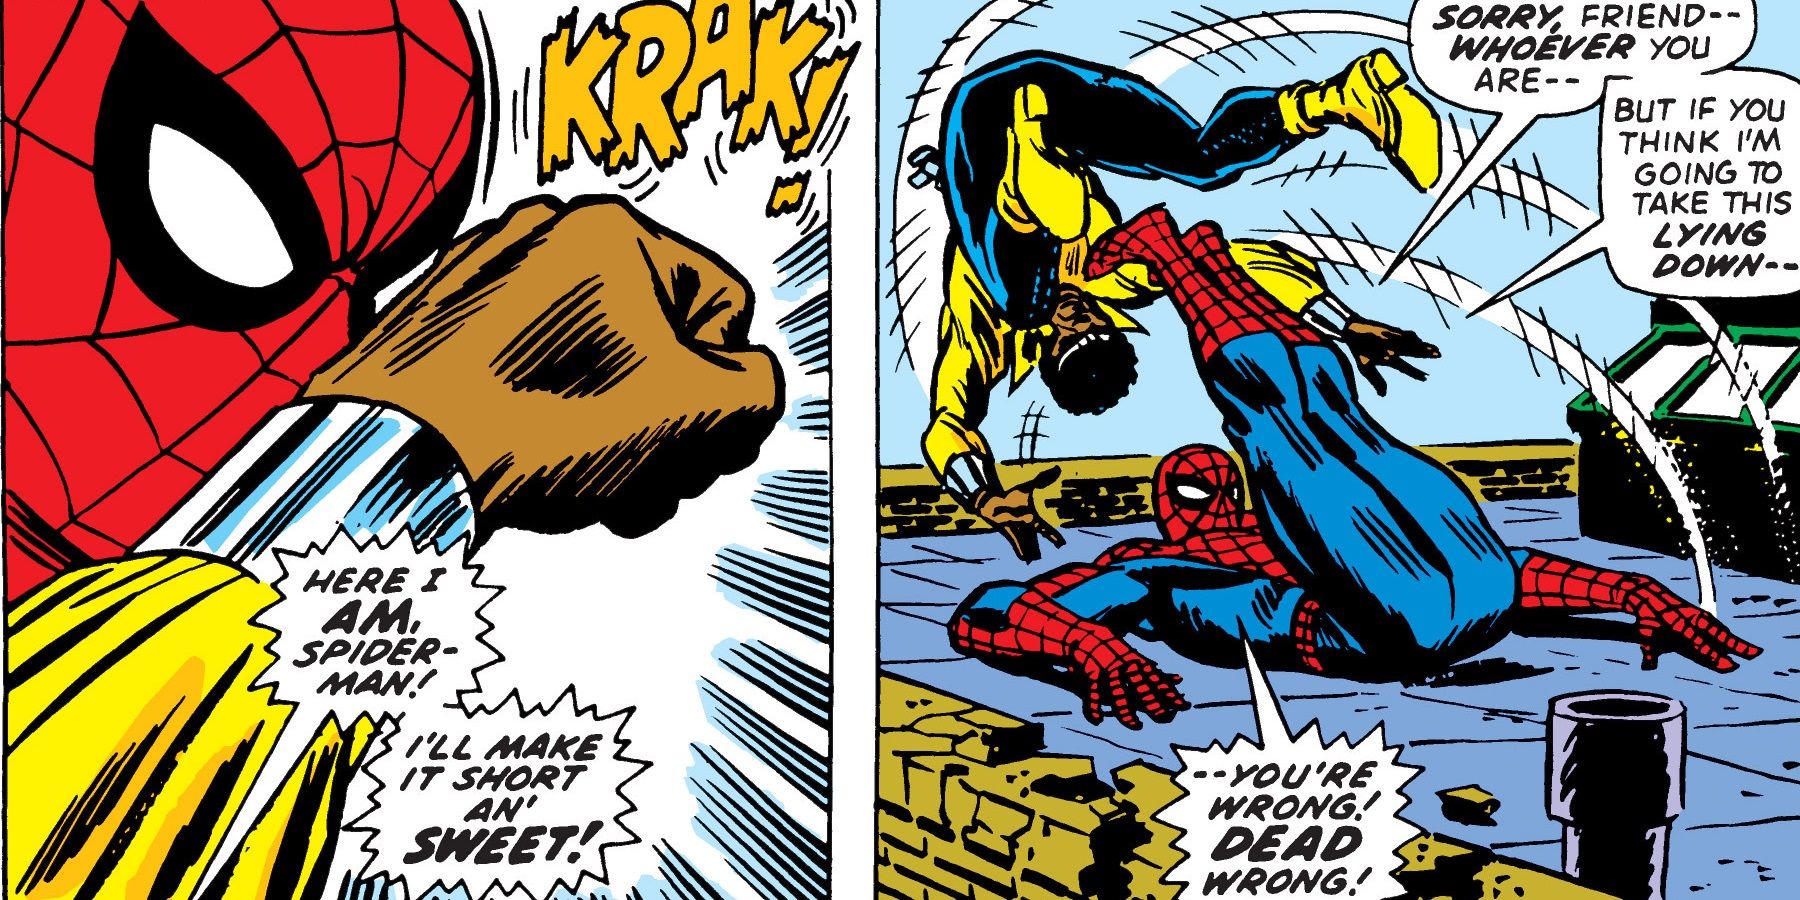 Spider-Man has a rooftop fight with Luke Cage